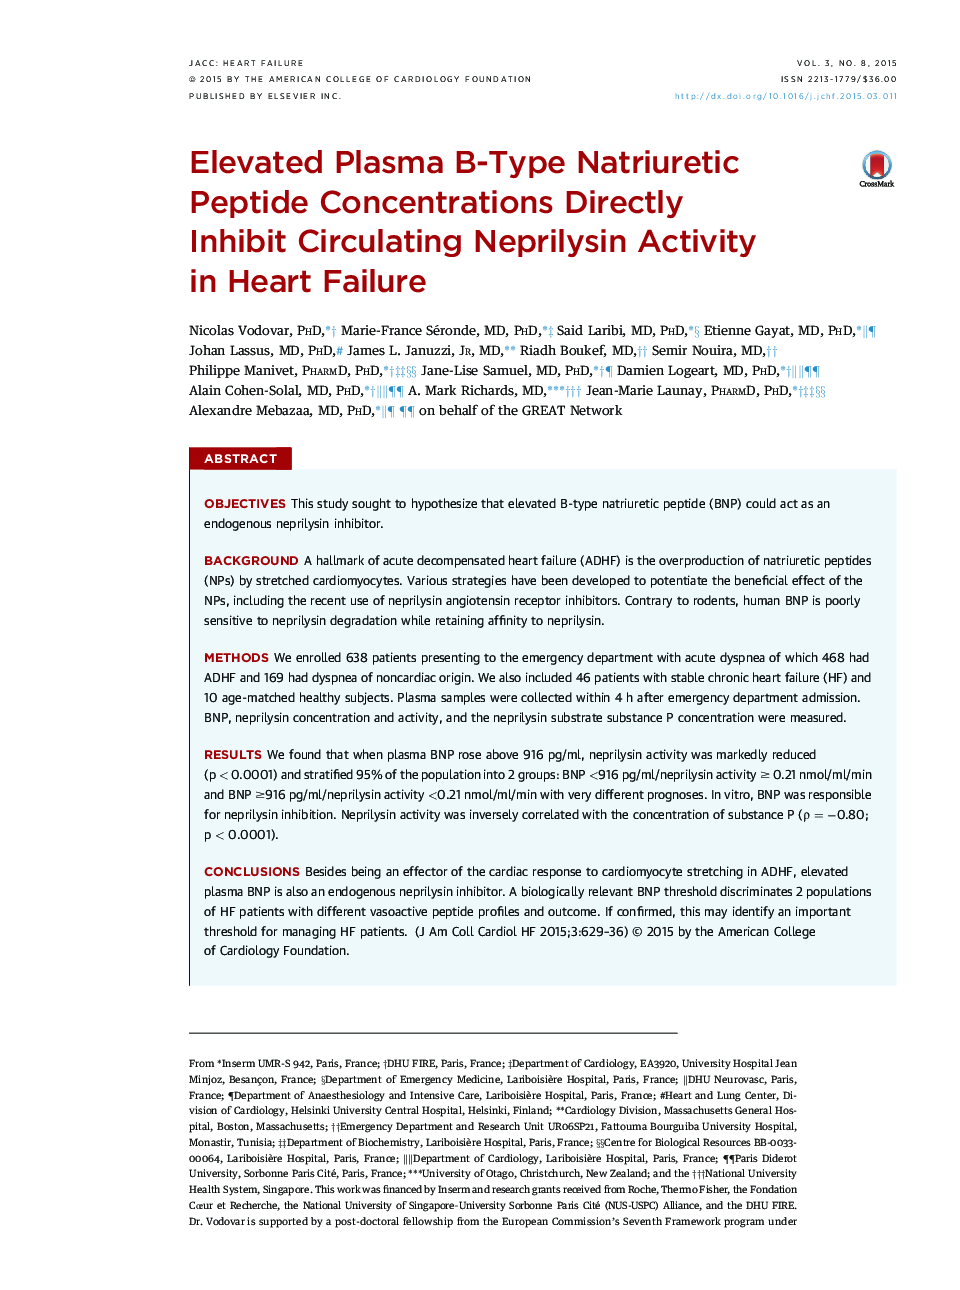 Elevated Plasma B-Type Natriuretic Peptide Concentrations Directly Inhibit Circulating Neprilysin Activity in Heart Failure 